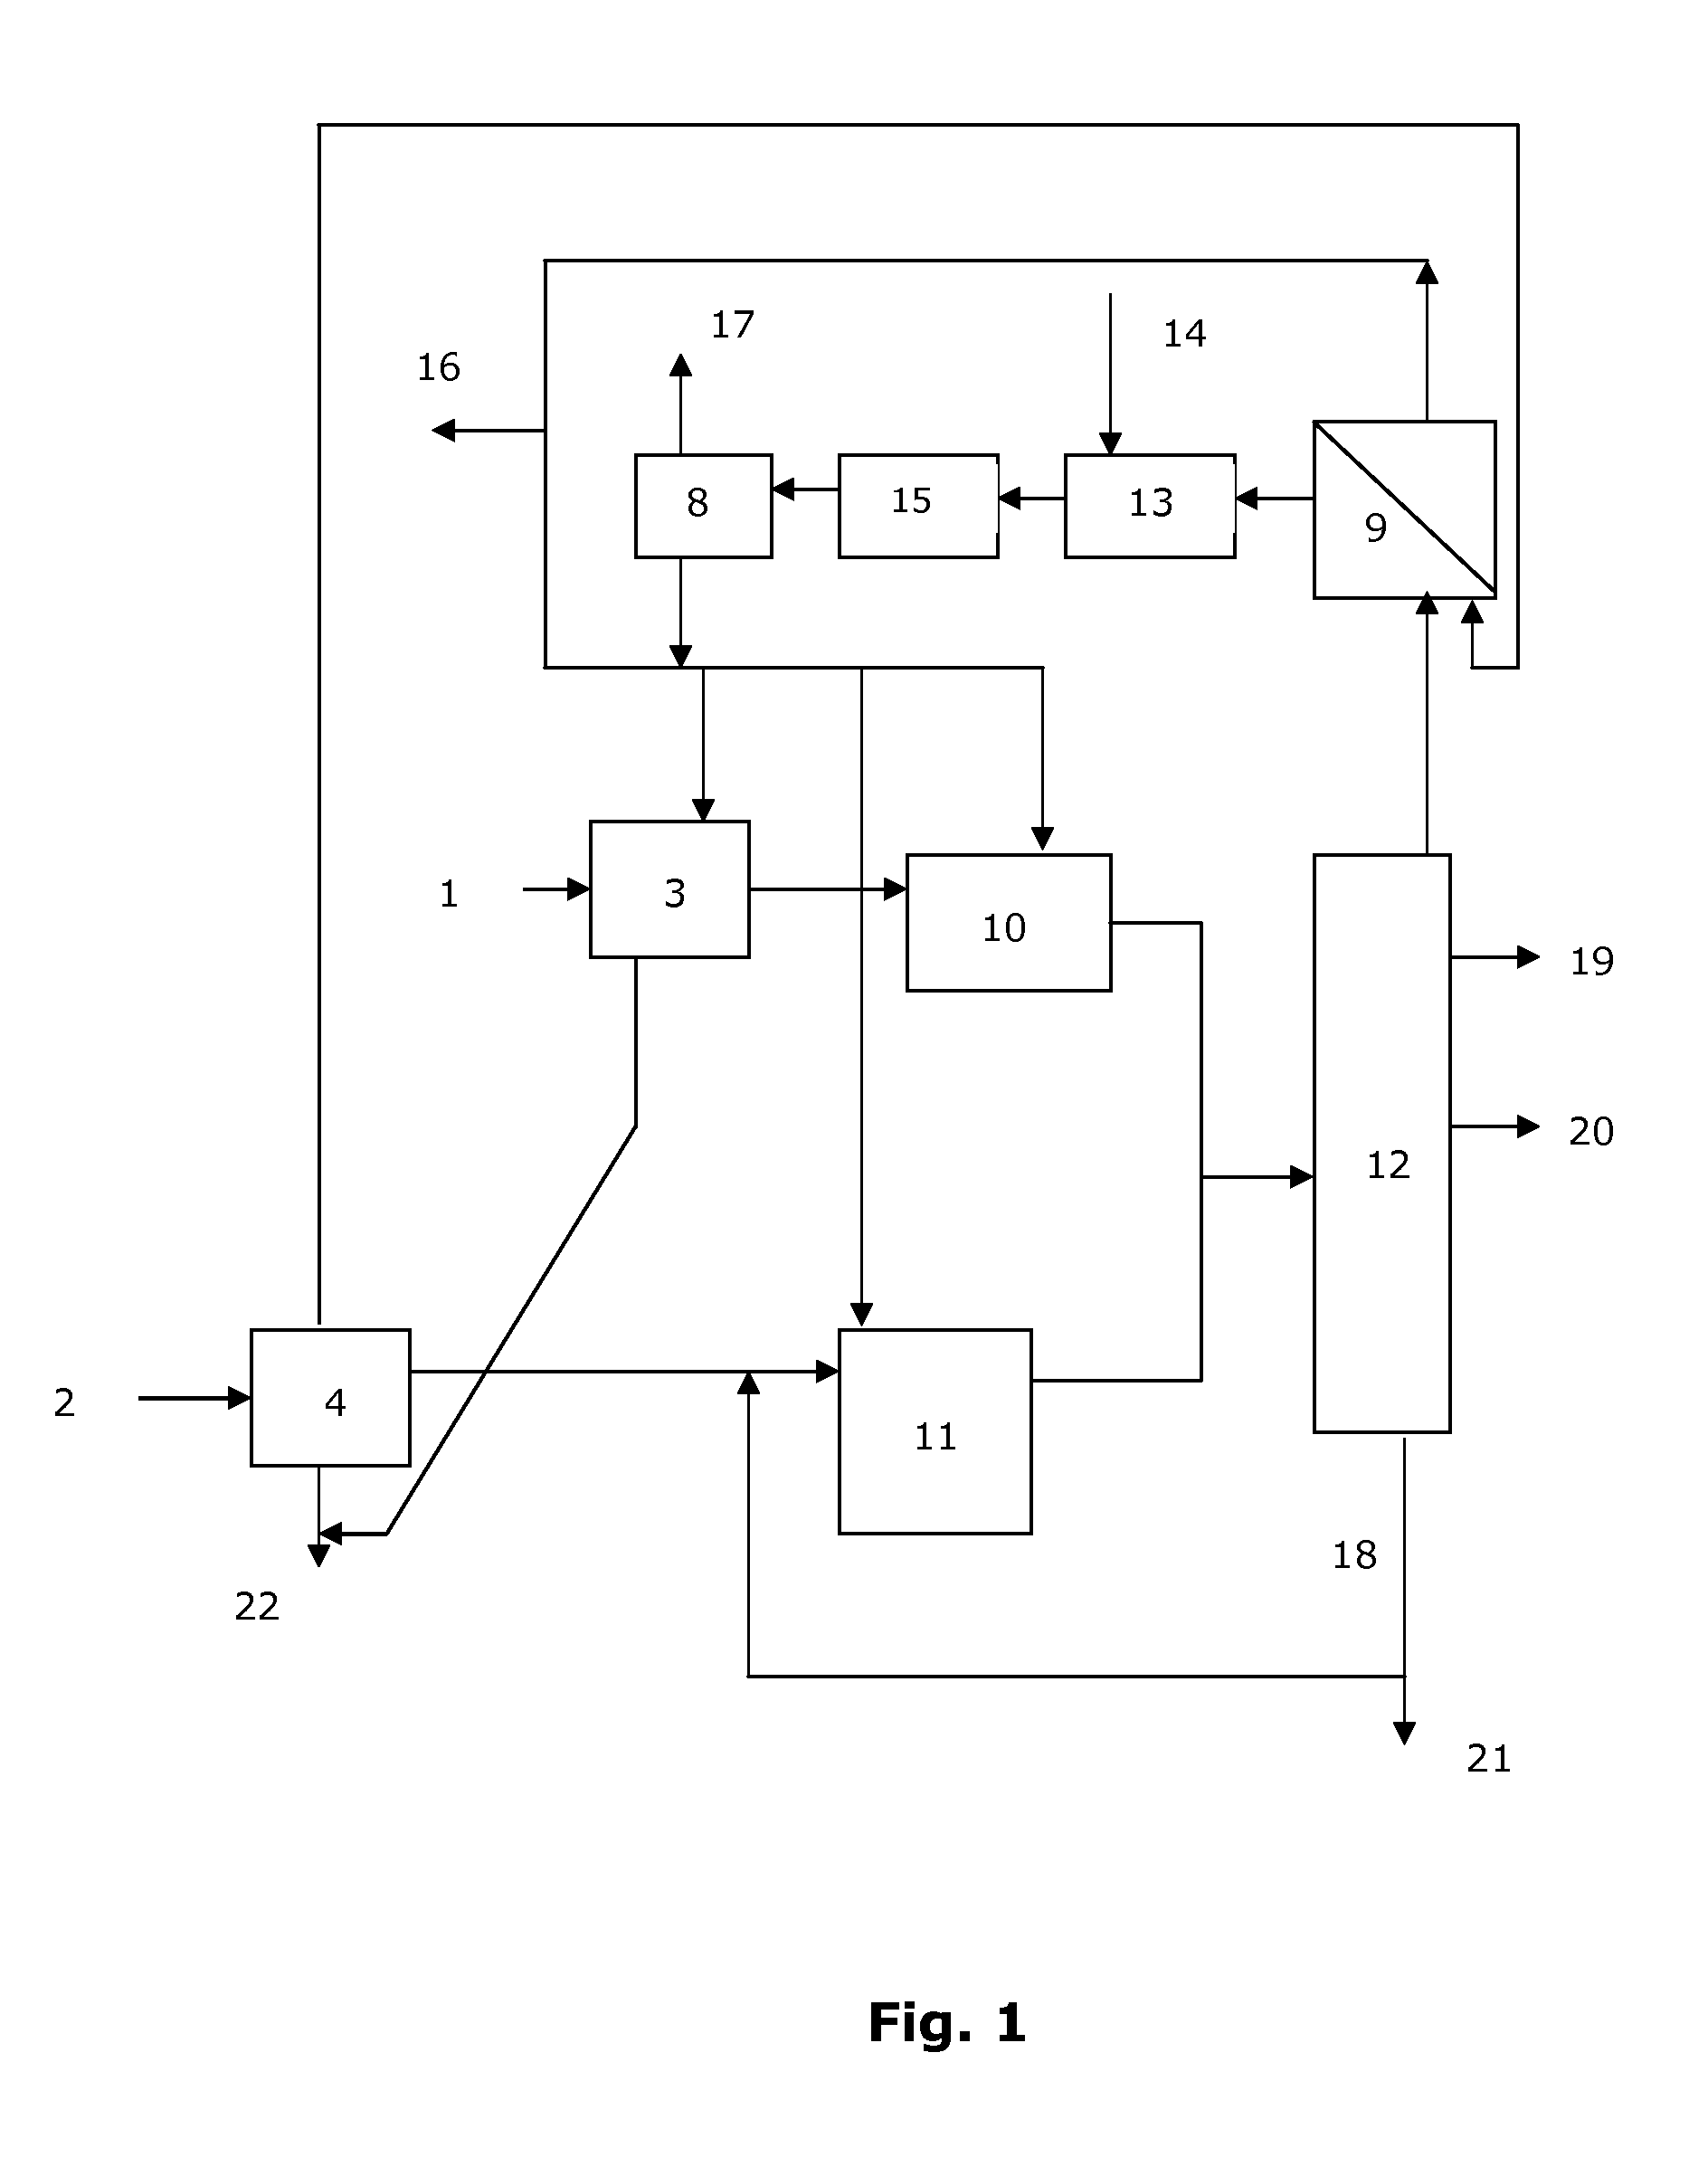 Integrated Process for Producing Diesel Fuel from Biological Material and Products, Uses and Equipment Relating to Said Process